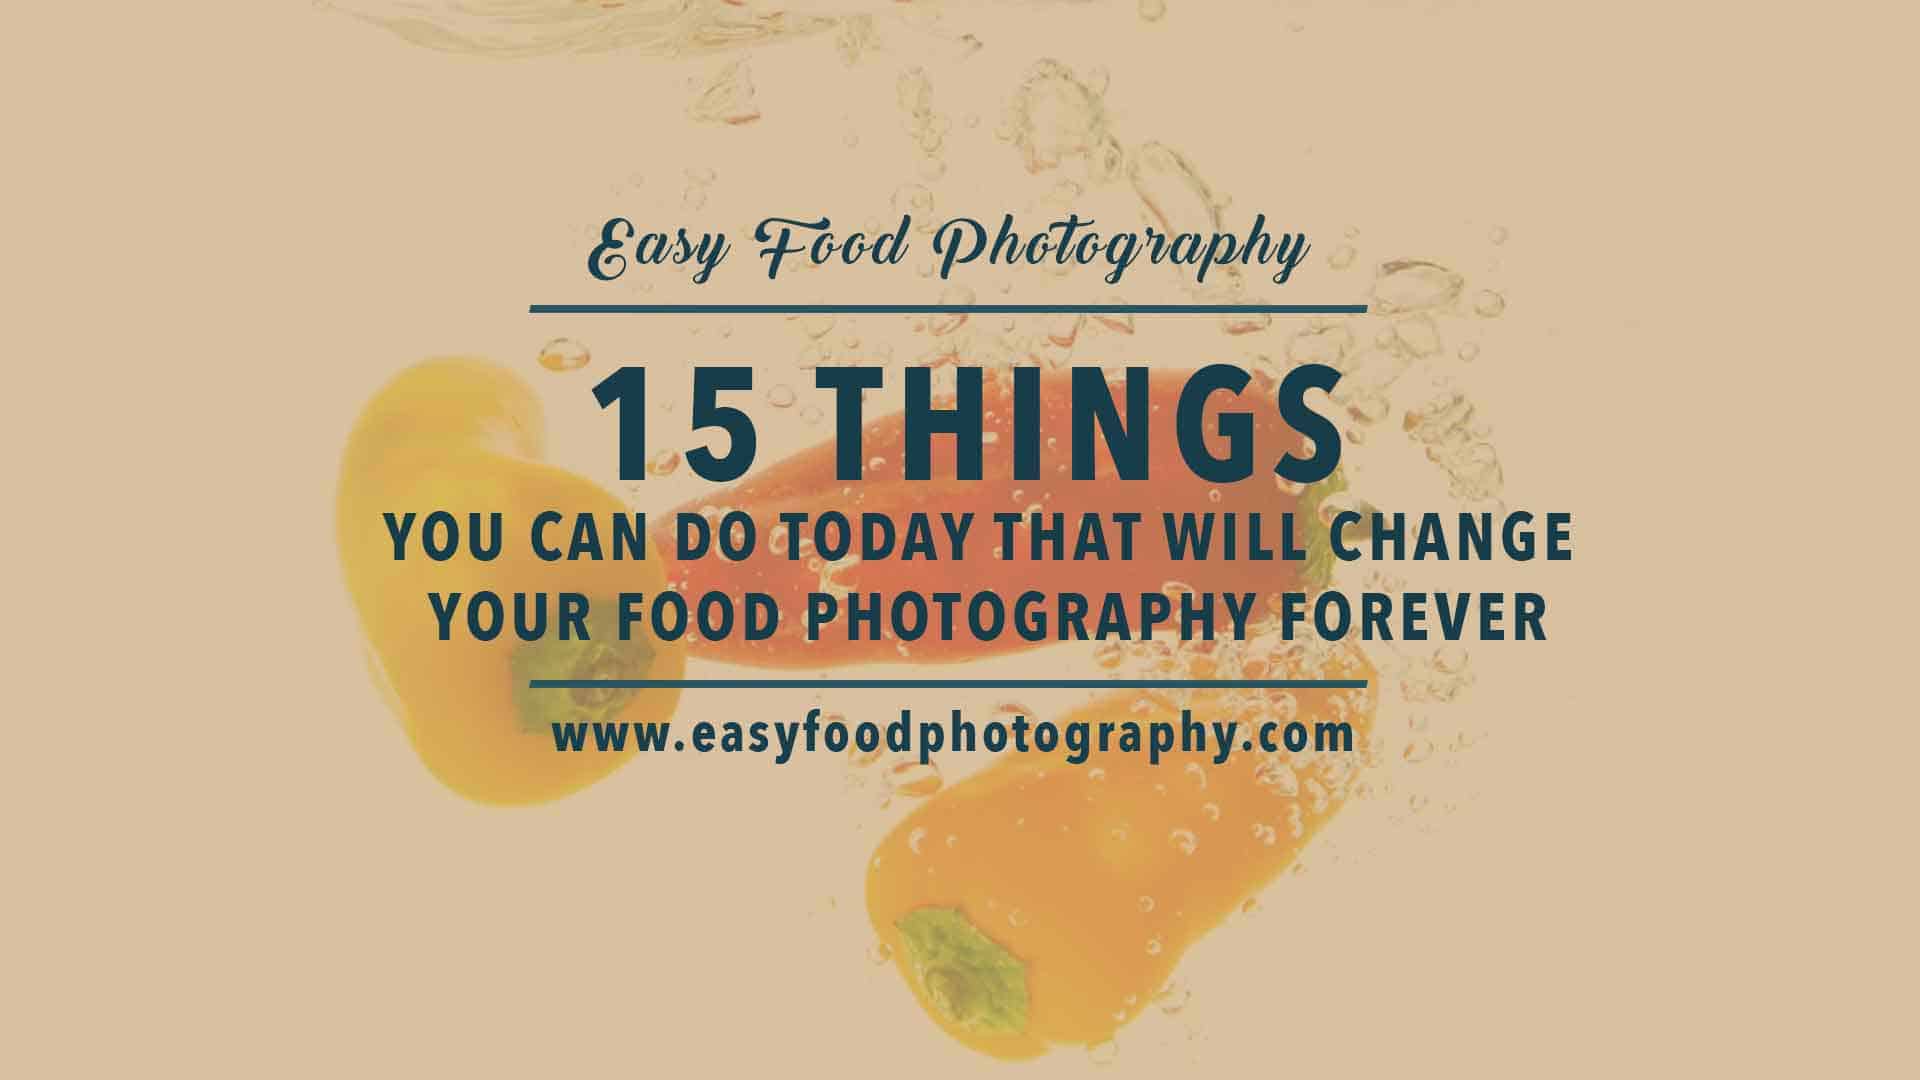 15 Things you can do today which will change your food photography forever